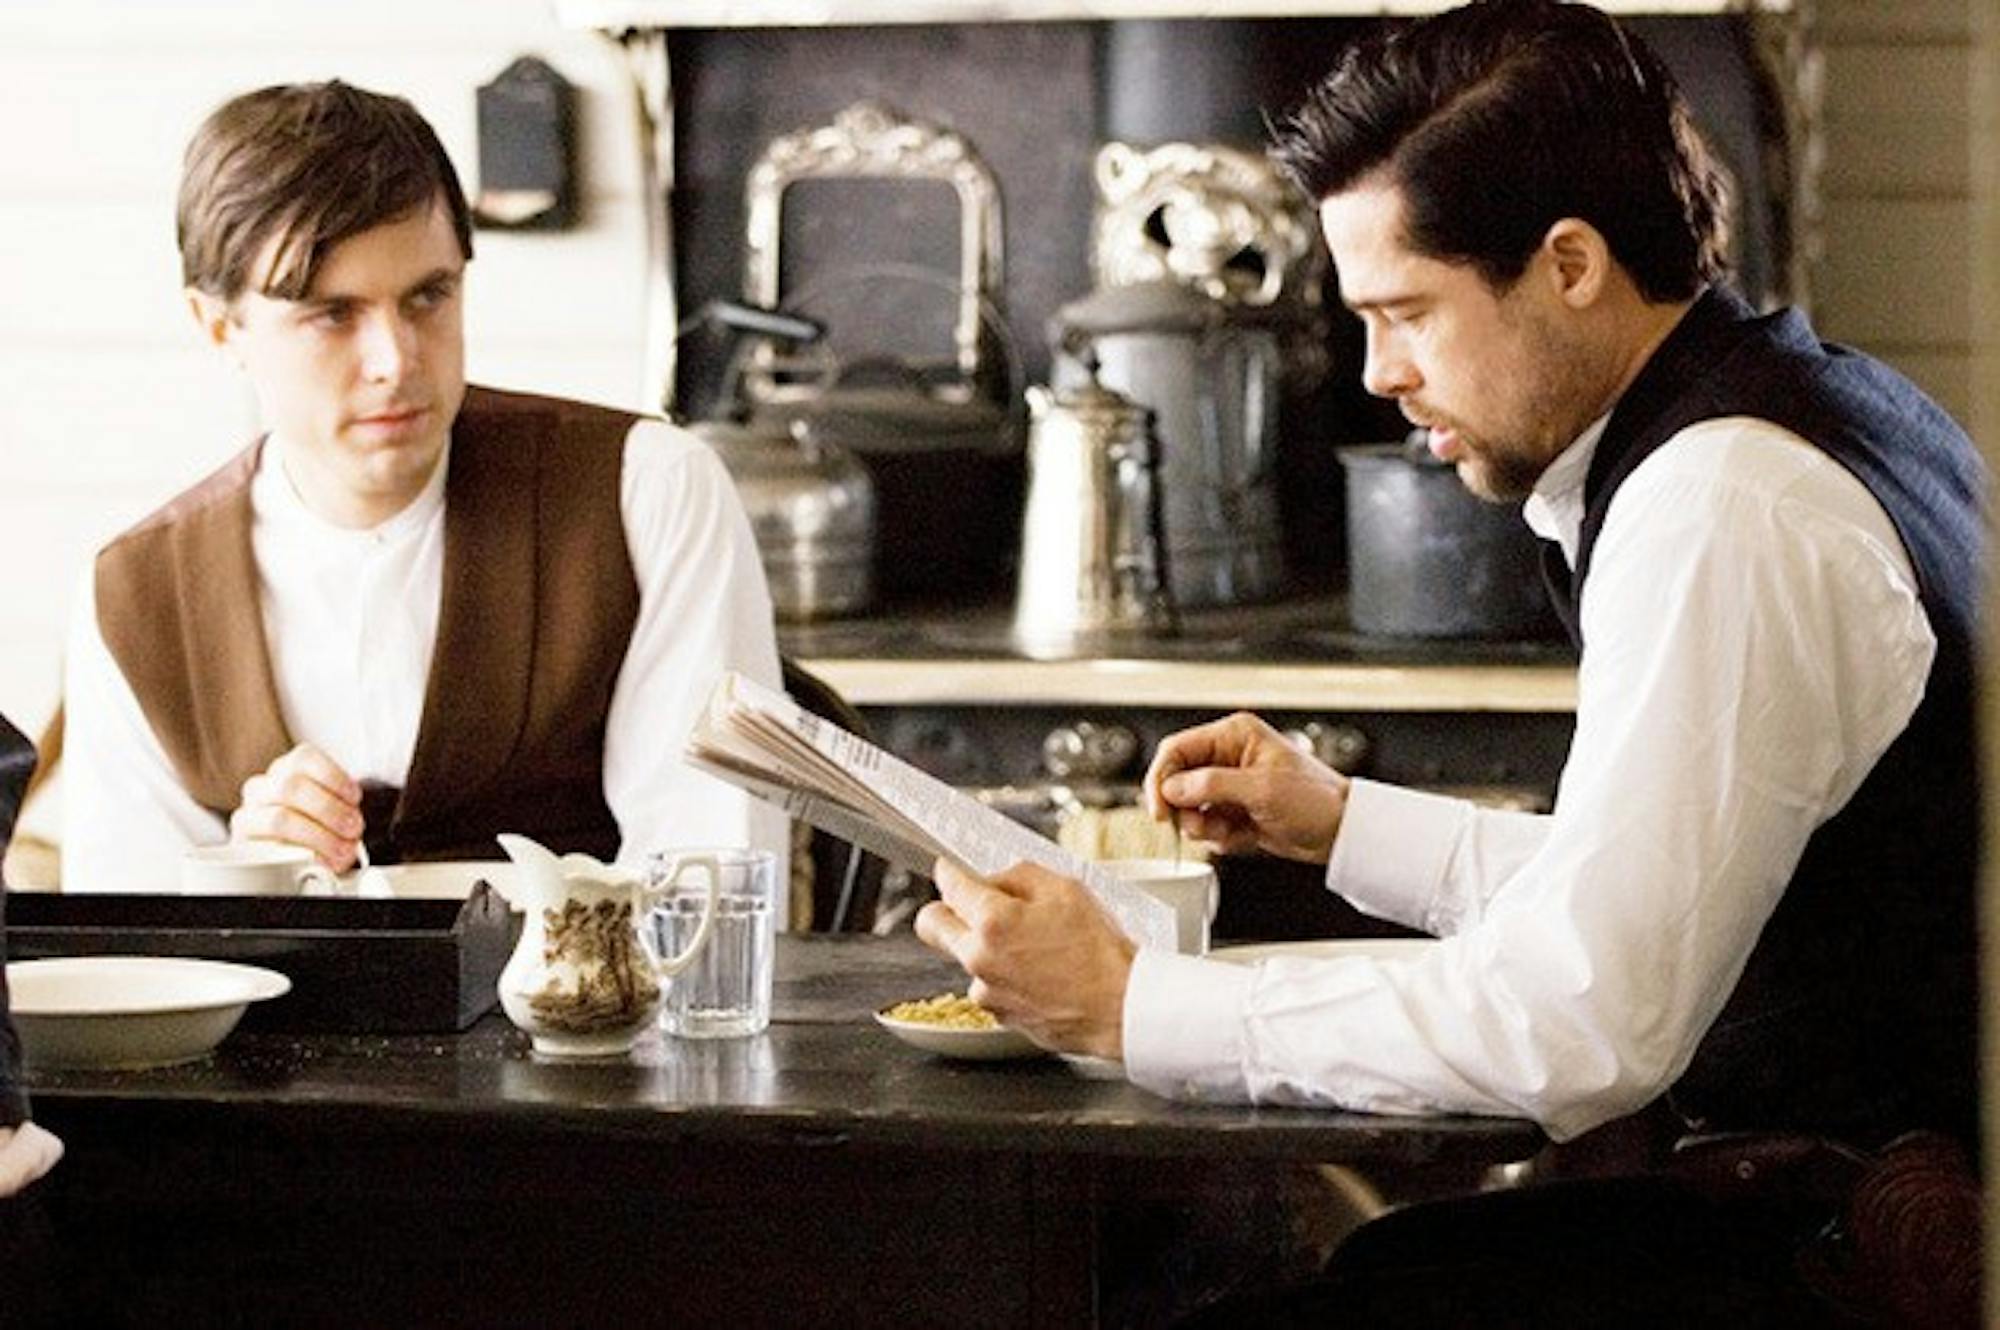 CASEY AFFLECK as Robert Ford and BRAD PITT as Jesse James in Warner Bros. Pictures